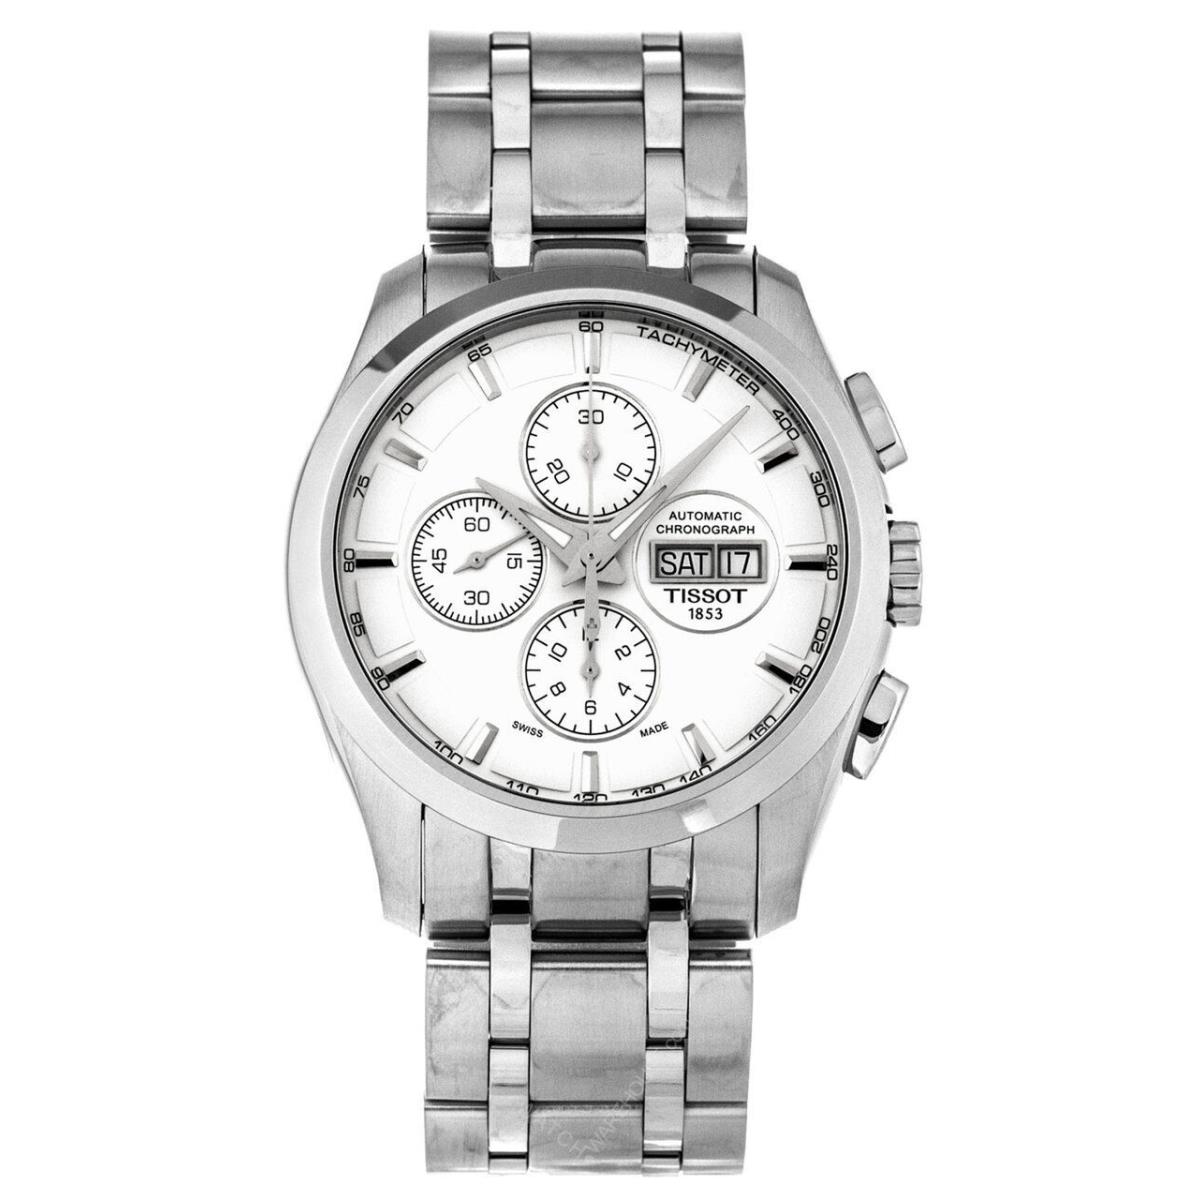 Tissot Couturier Chronograph Silver Dial SS Auto Men Watch T0356141103100 - Silver Dial, Silver Band, Silver Bezel